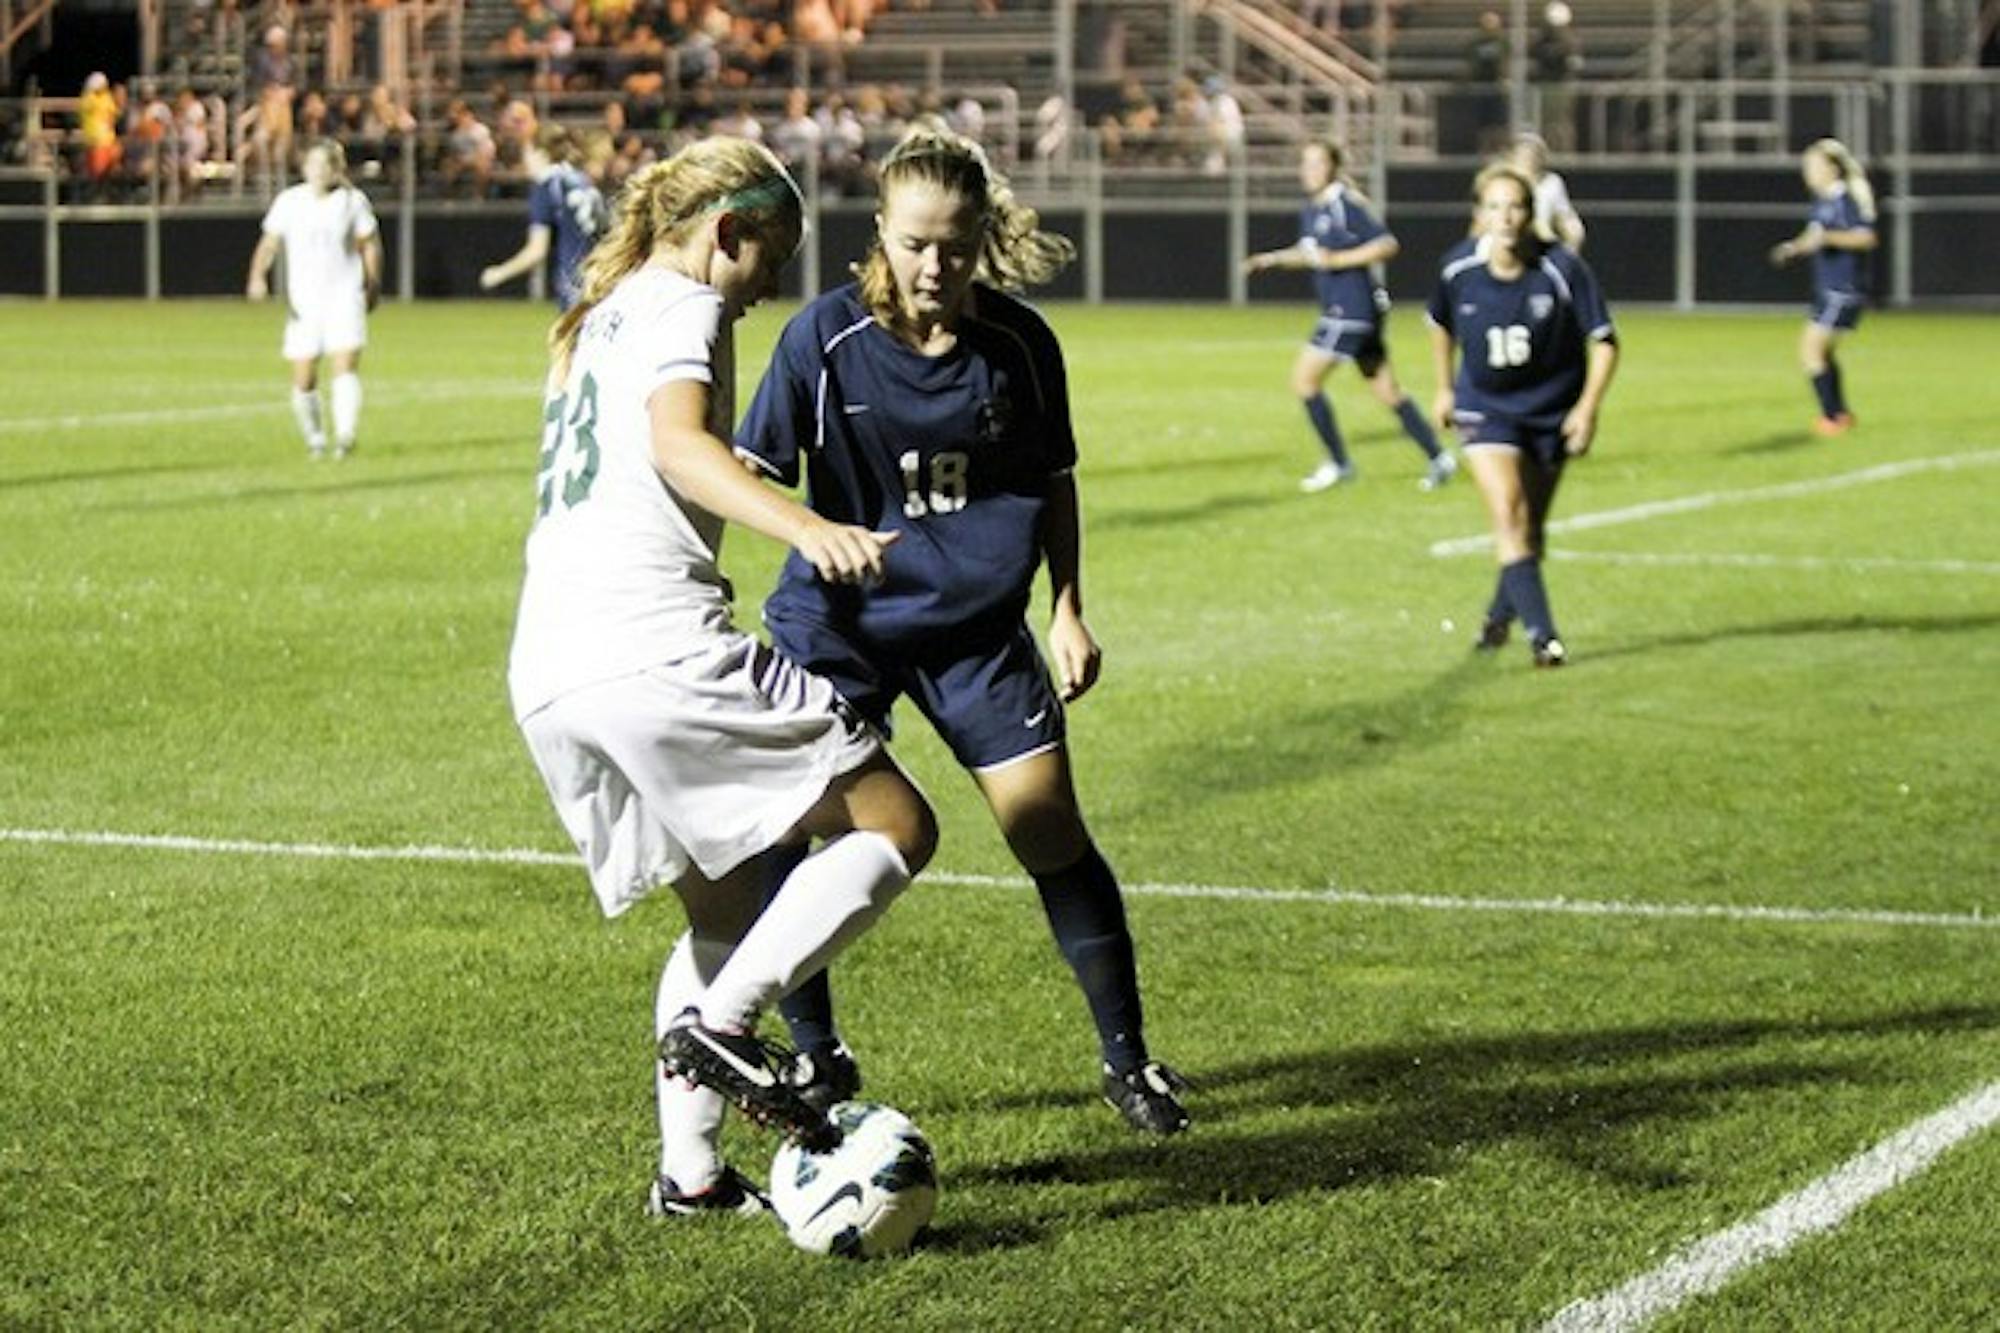 Emma Brush '13 was named Dartmouth Player of the Year in 2011 and has flourished this season as a forward.